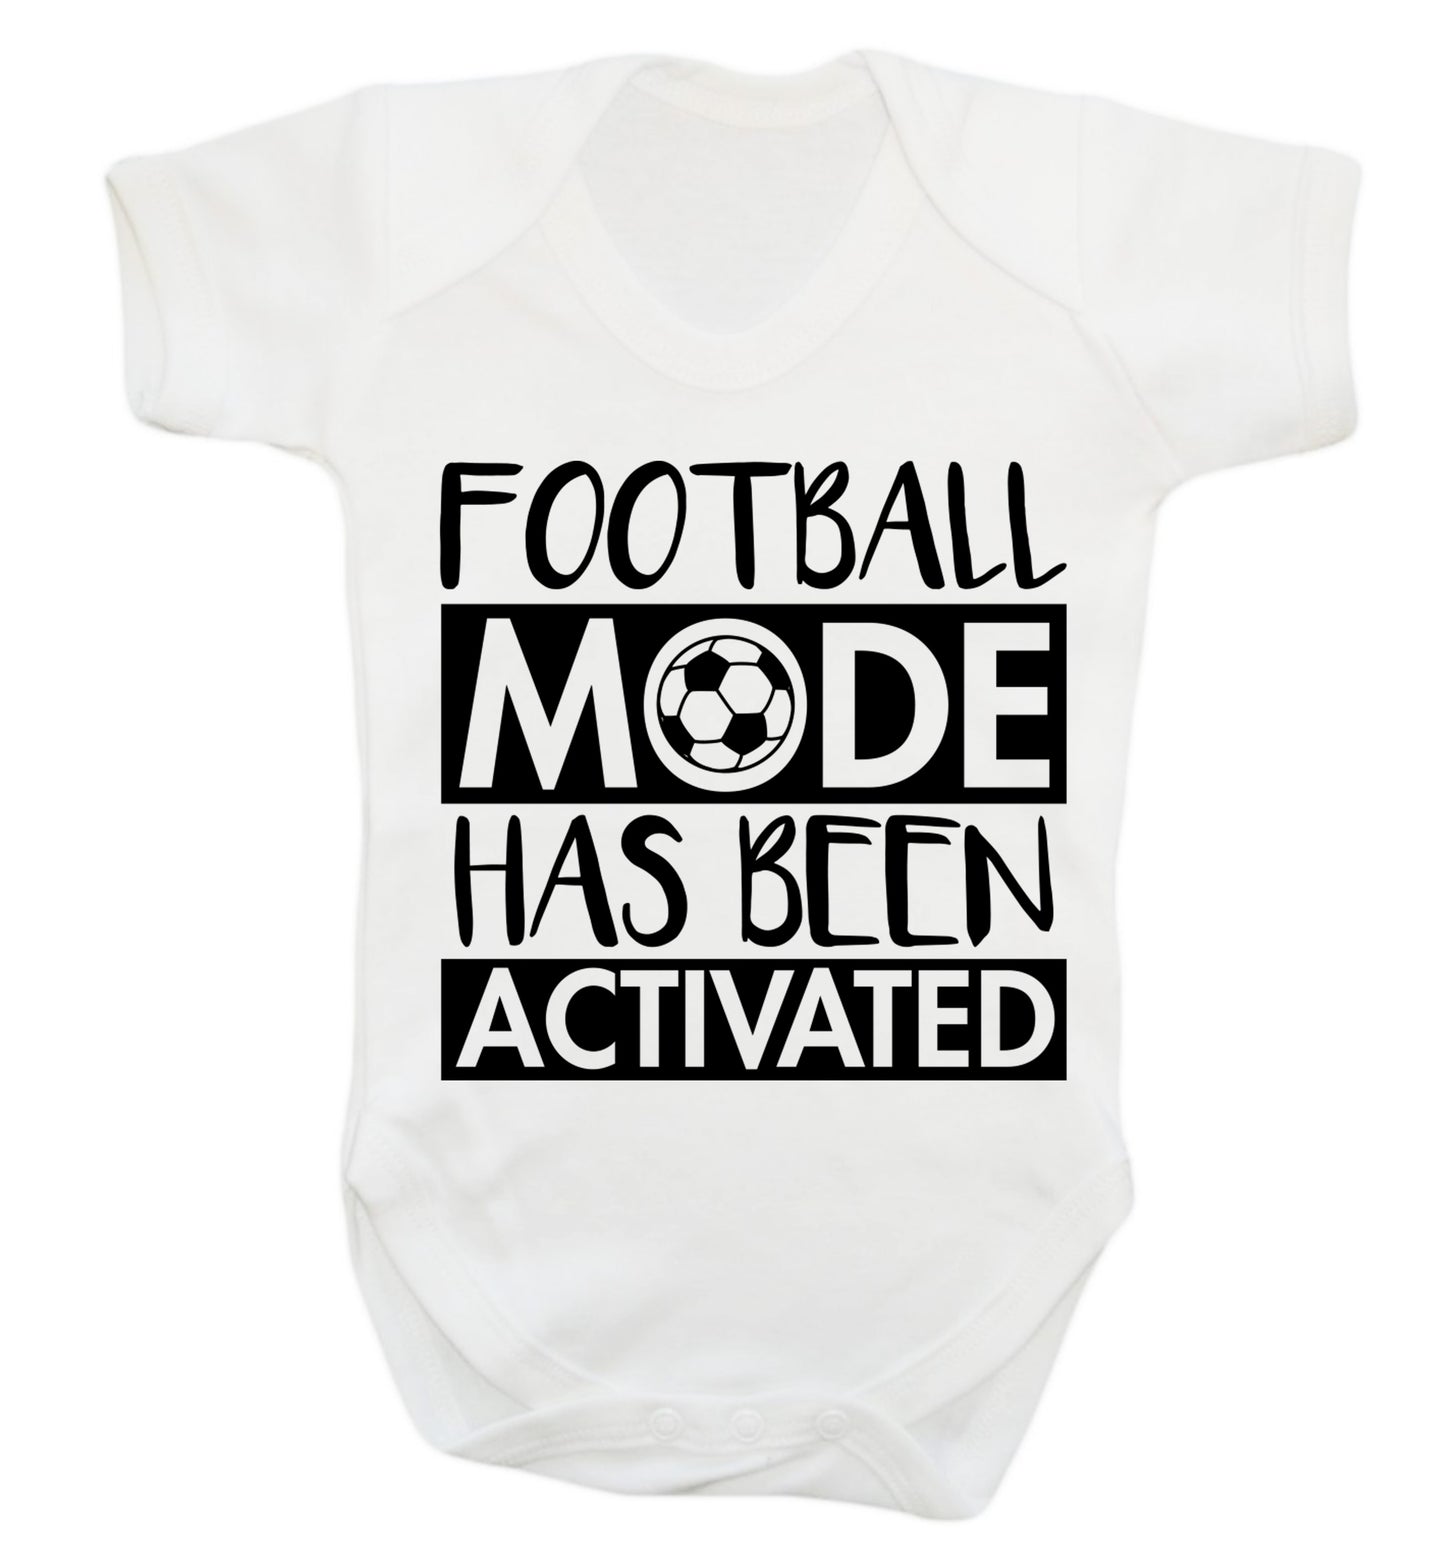 Football mode has been activated Baby Vest white 18-24 months